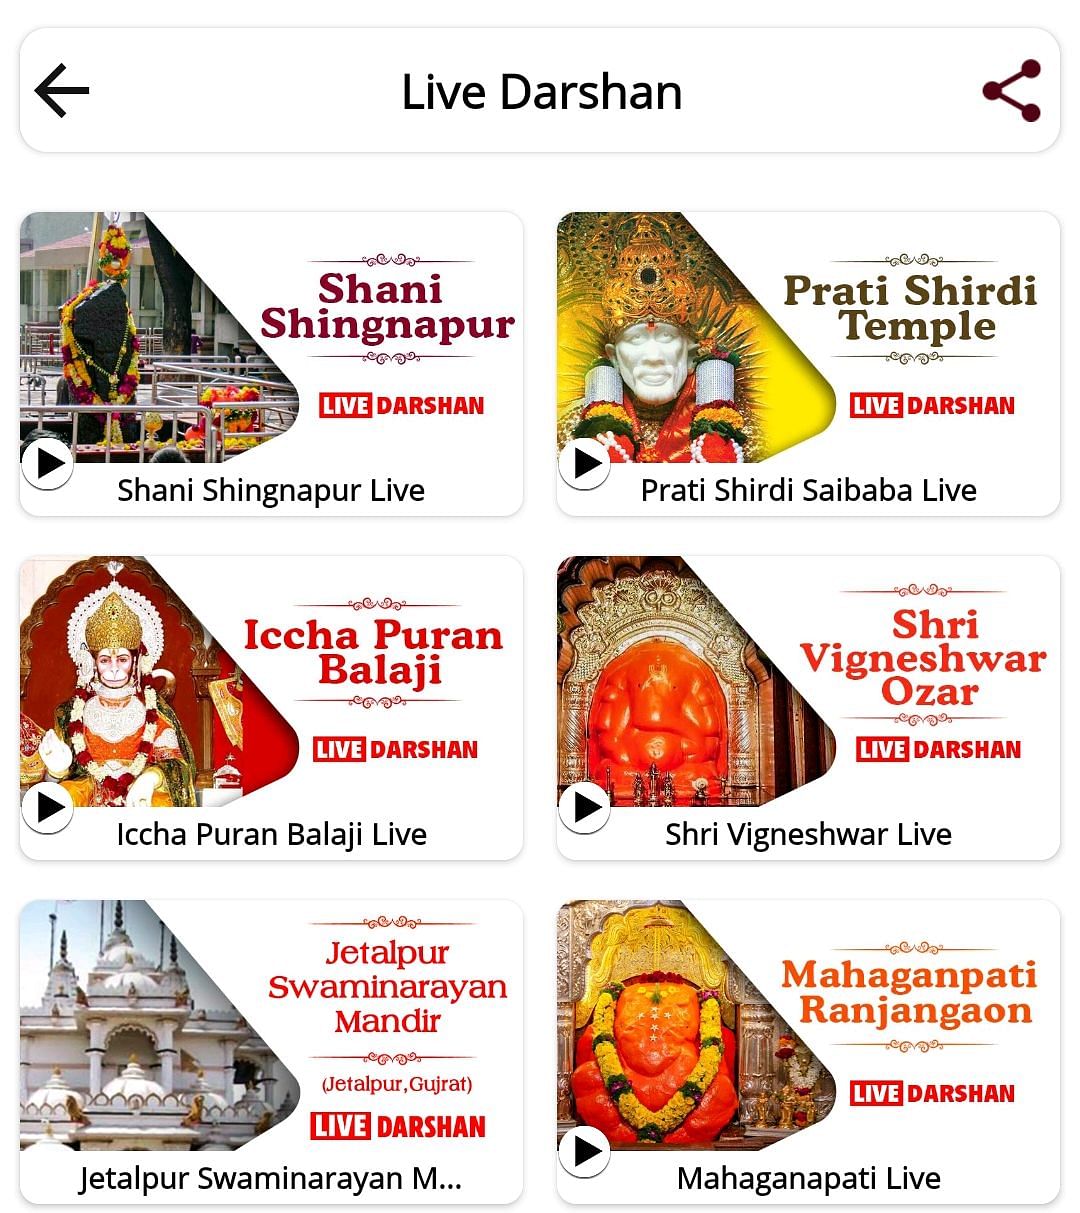 During lockdown, when all temples were shut to the public, many live-darshan apps helped devotees stay in touch.